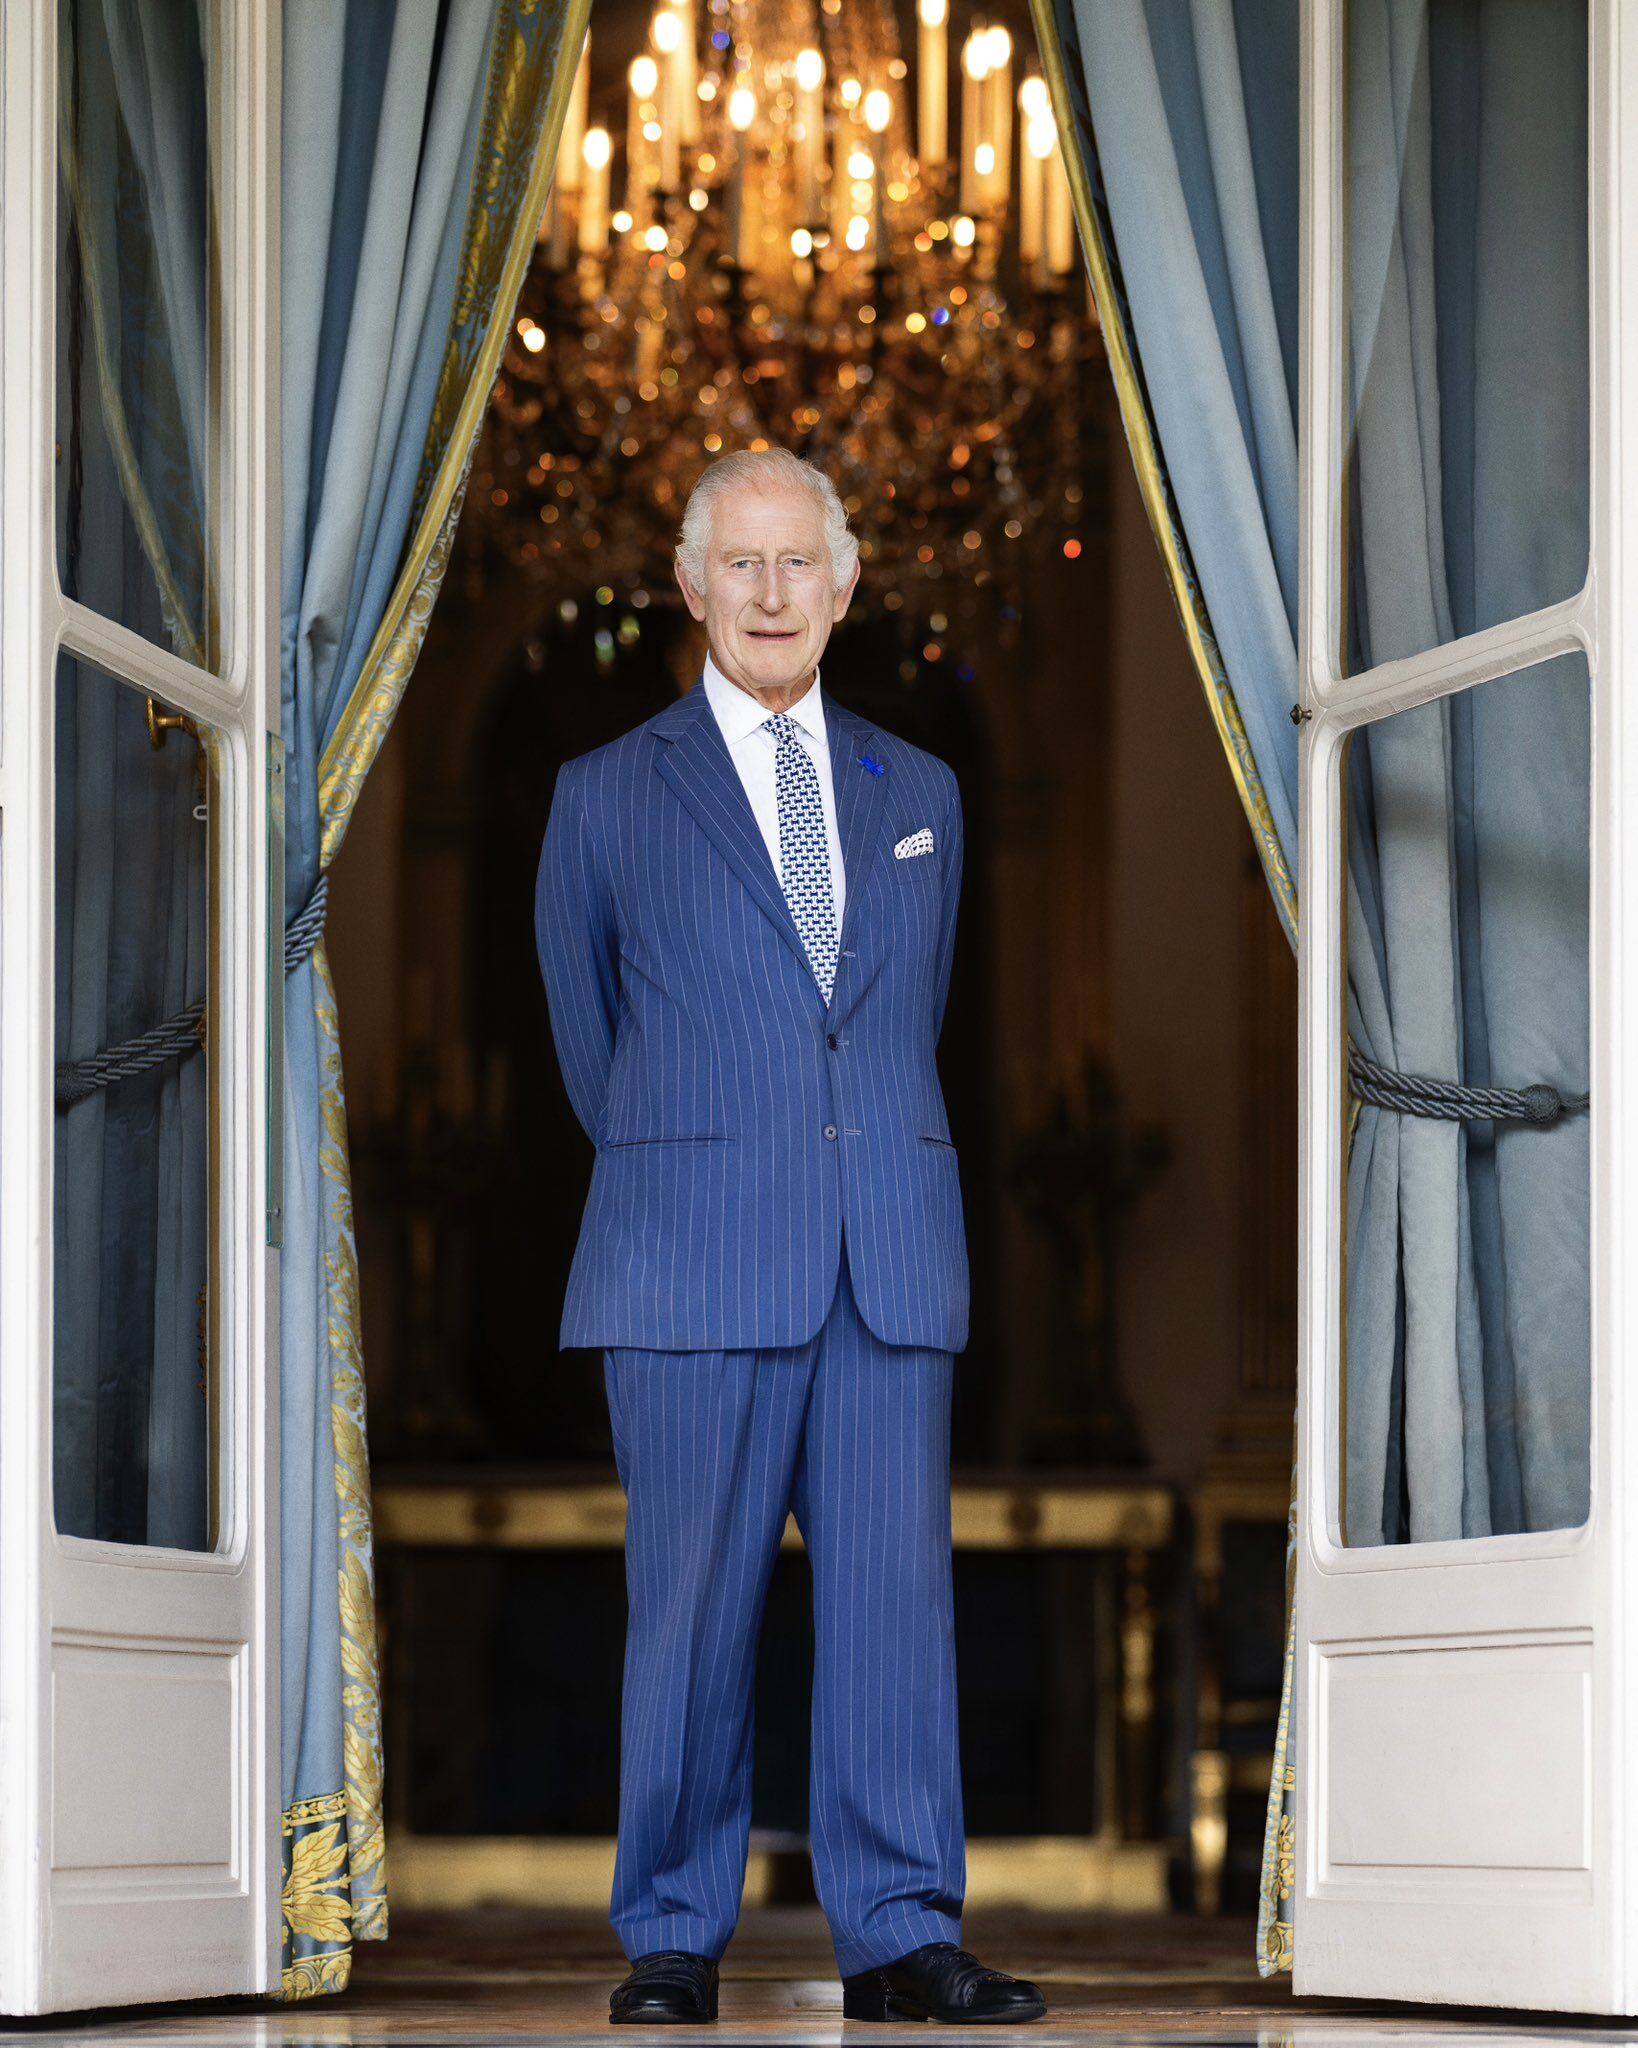 King Charles III has been diagnosed with a “form of cancer”, according to a statement released by Buckingham Palace on February 5 – but what does he actually do as Britain’s head of state? Photo: @RoyalFamily/X